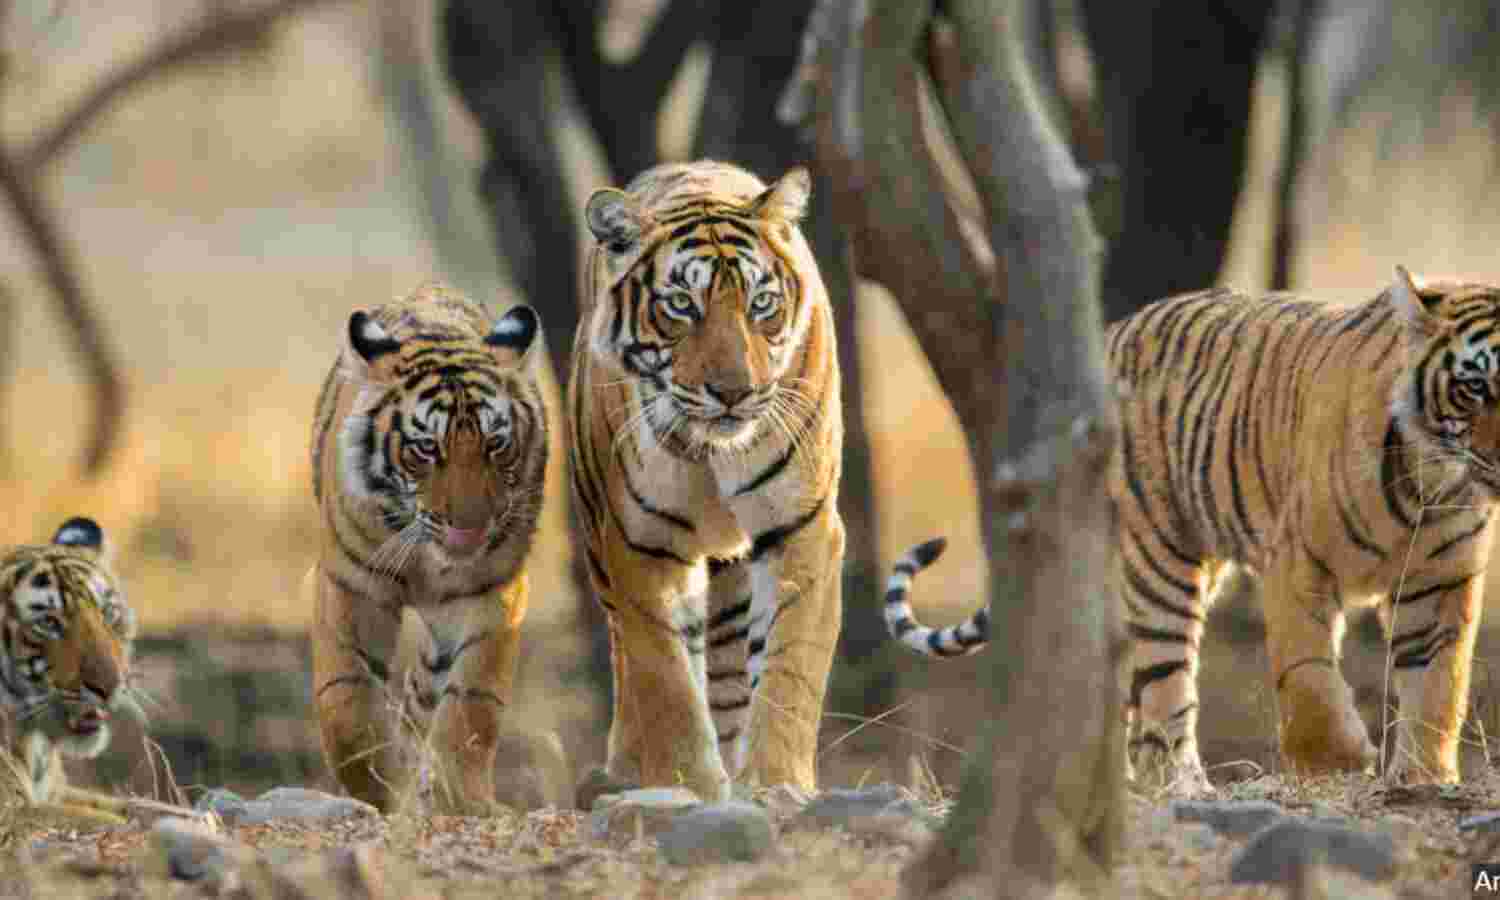 India's Tiger Population Reaches 3,925 with 6.1% Annual Growth Rate, Holds 75% of Global Wild Tiger Population